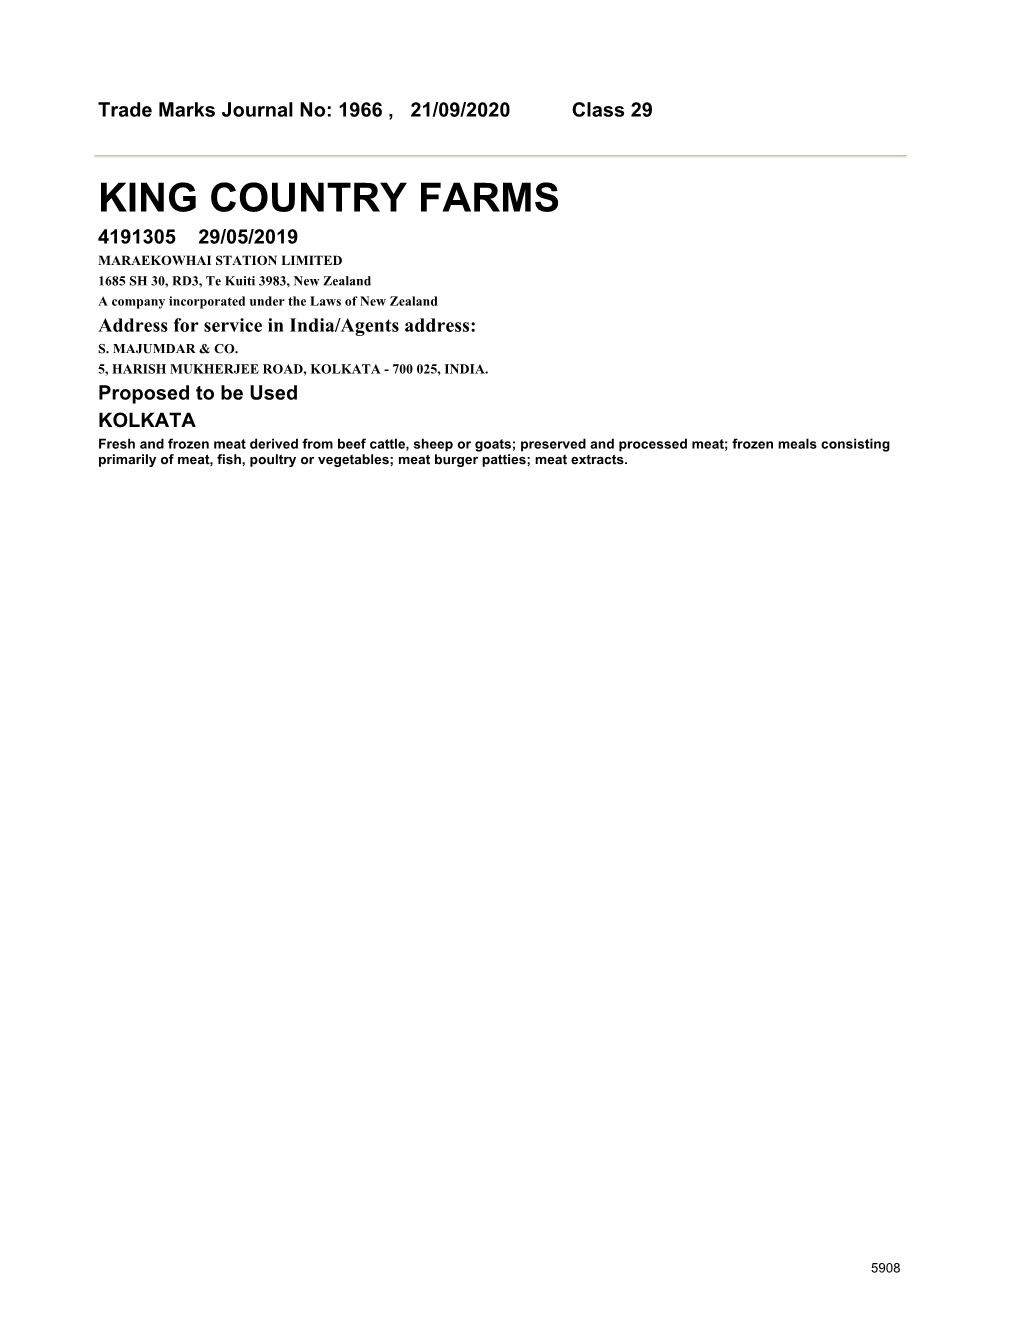 King Country Farms